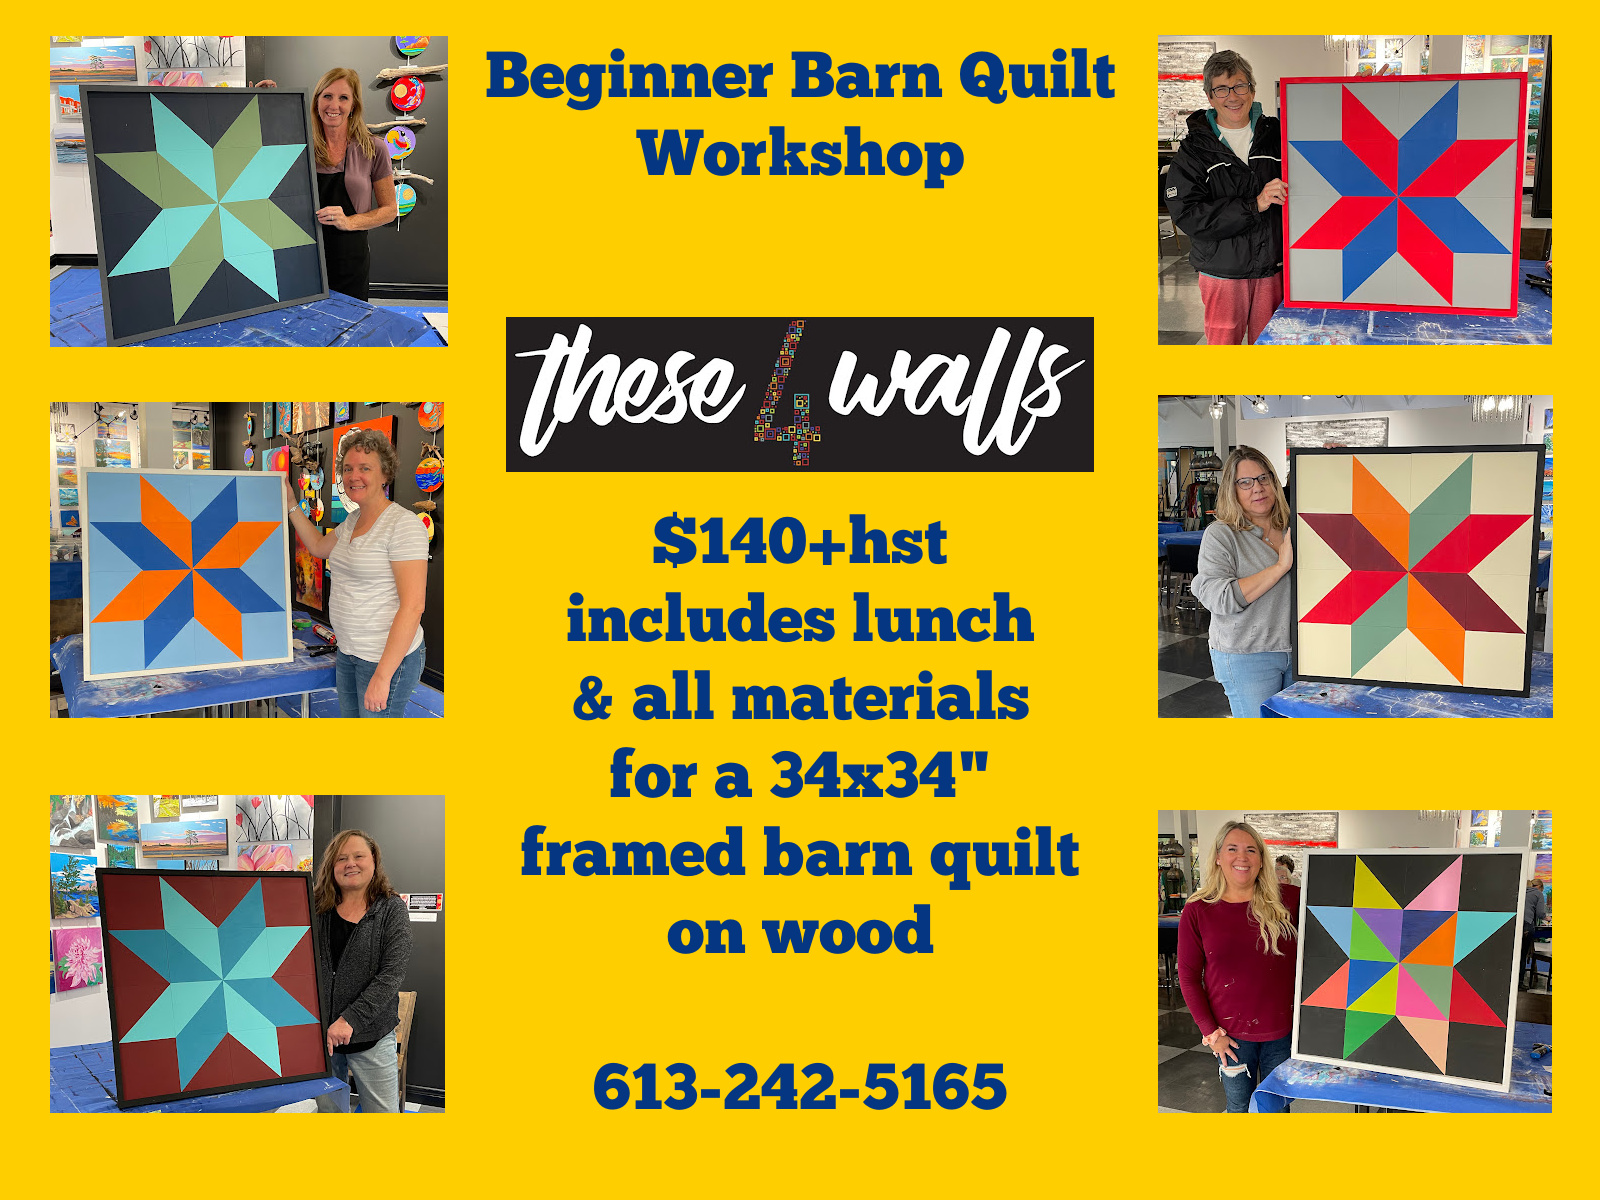 event poster with 6 people holding onto their 'Barn quilt'. Event details are also present.